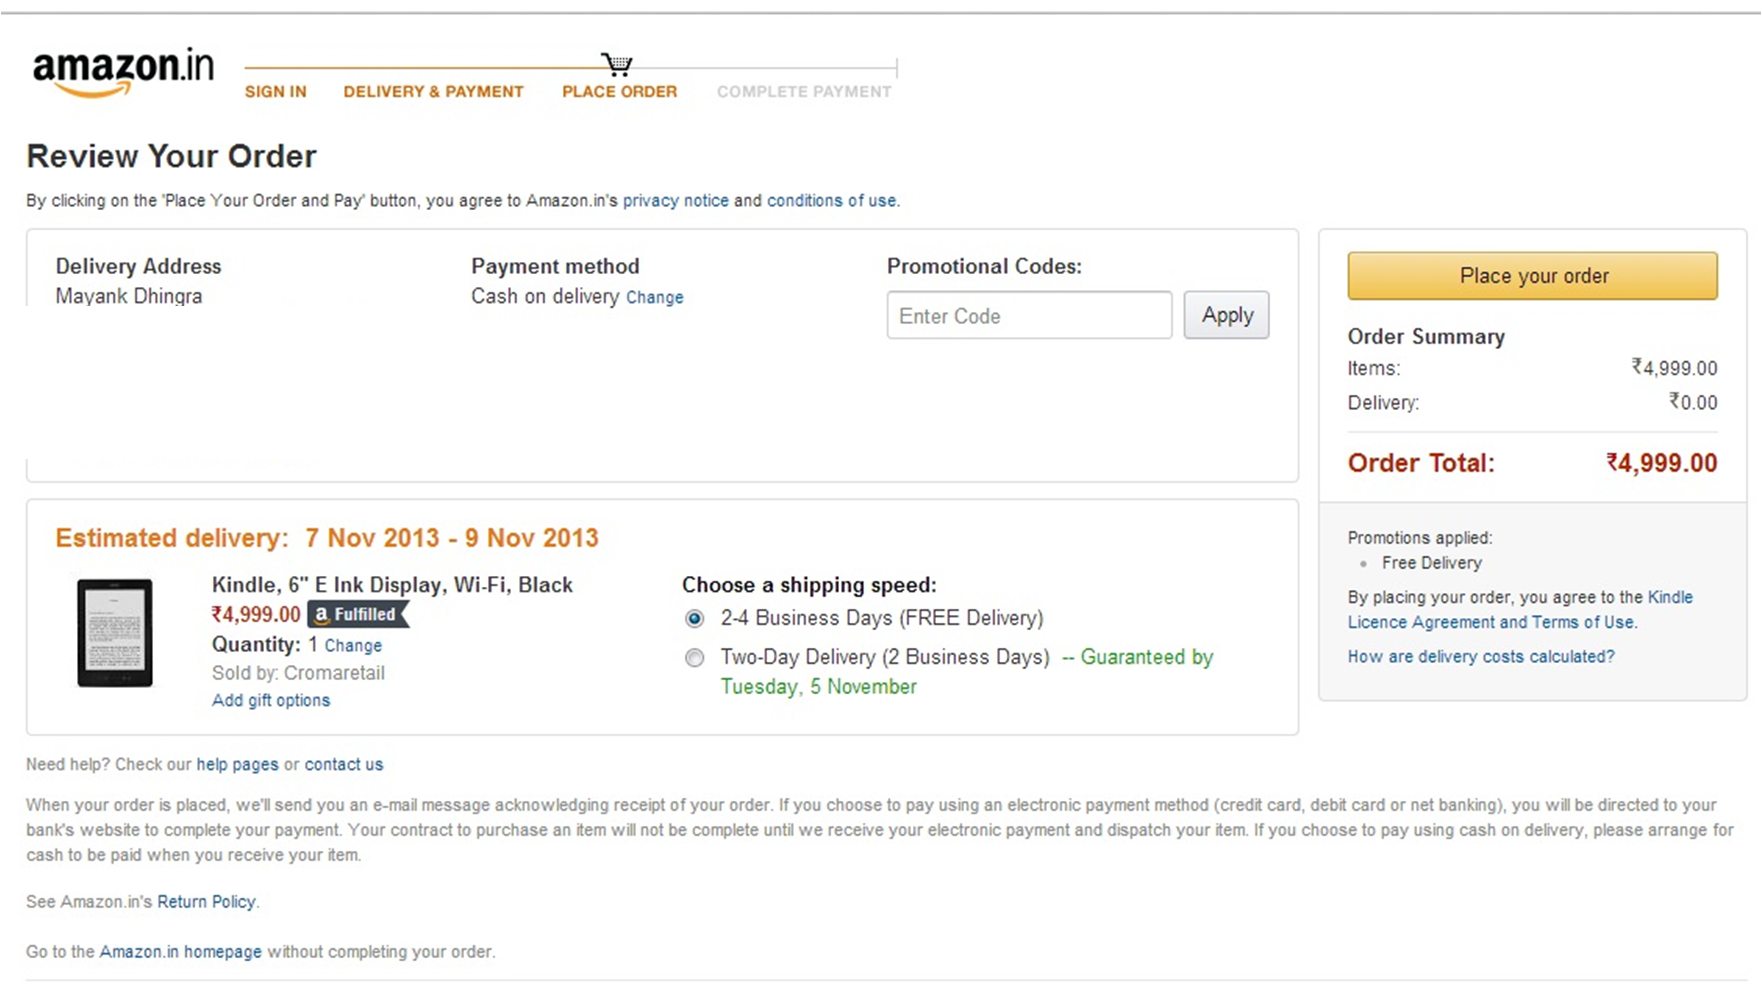 Review order page - Amazon.in